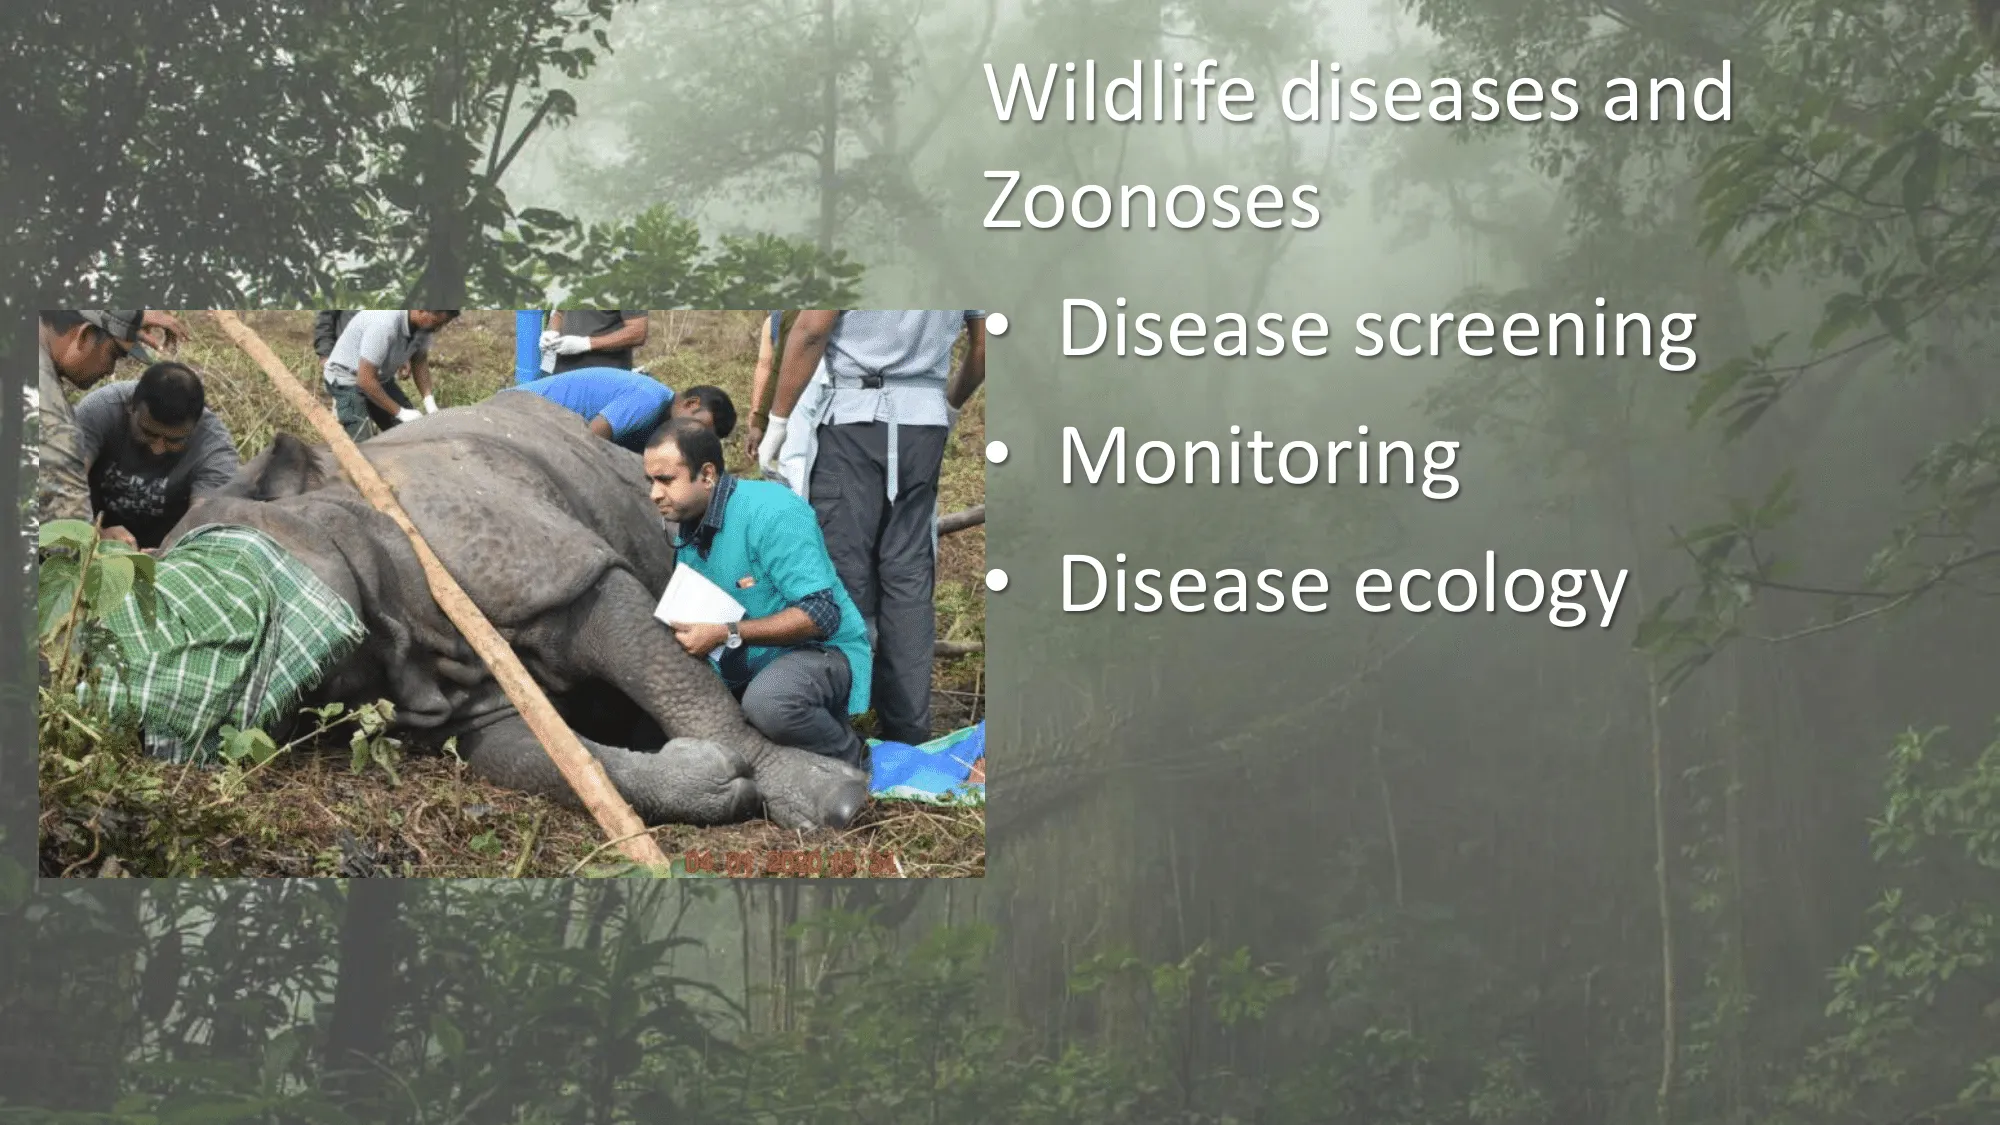 Wildlife diseases and zoonoses